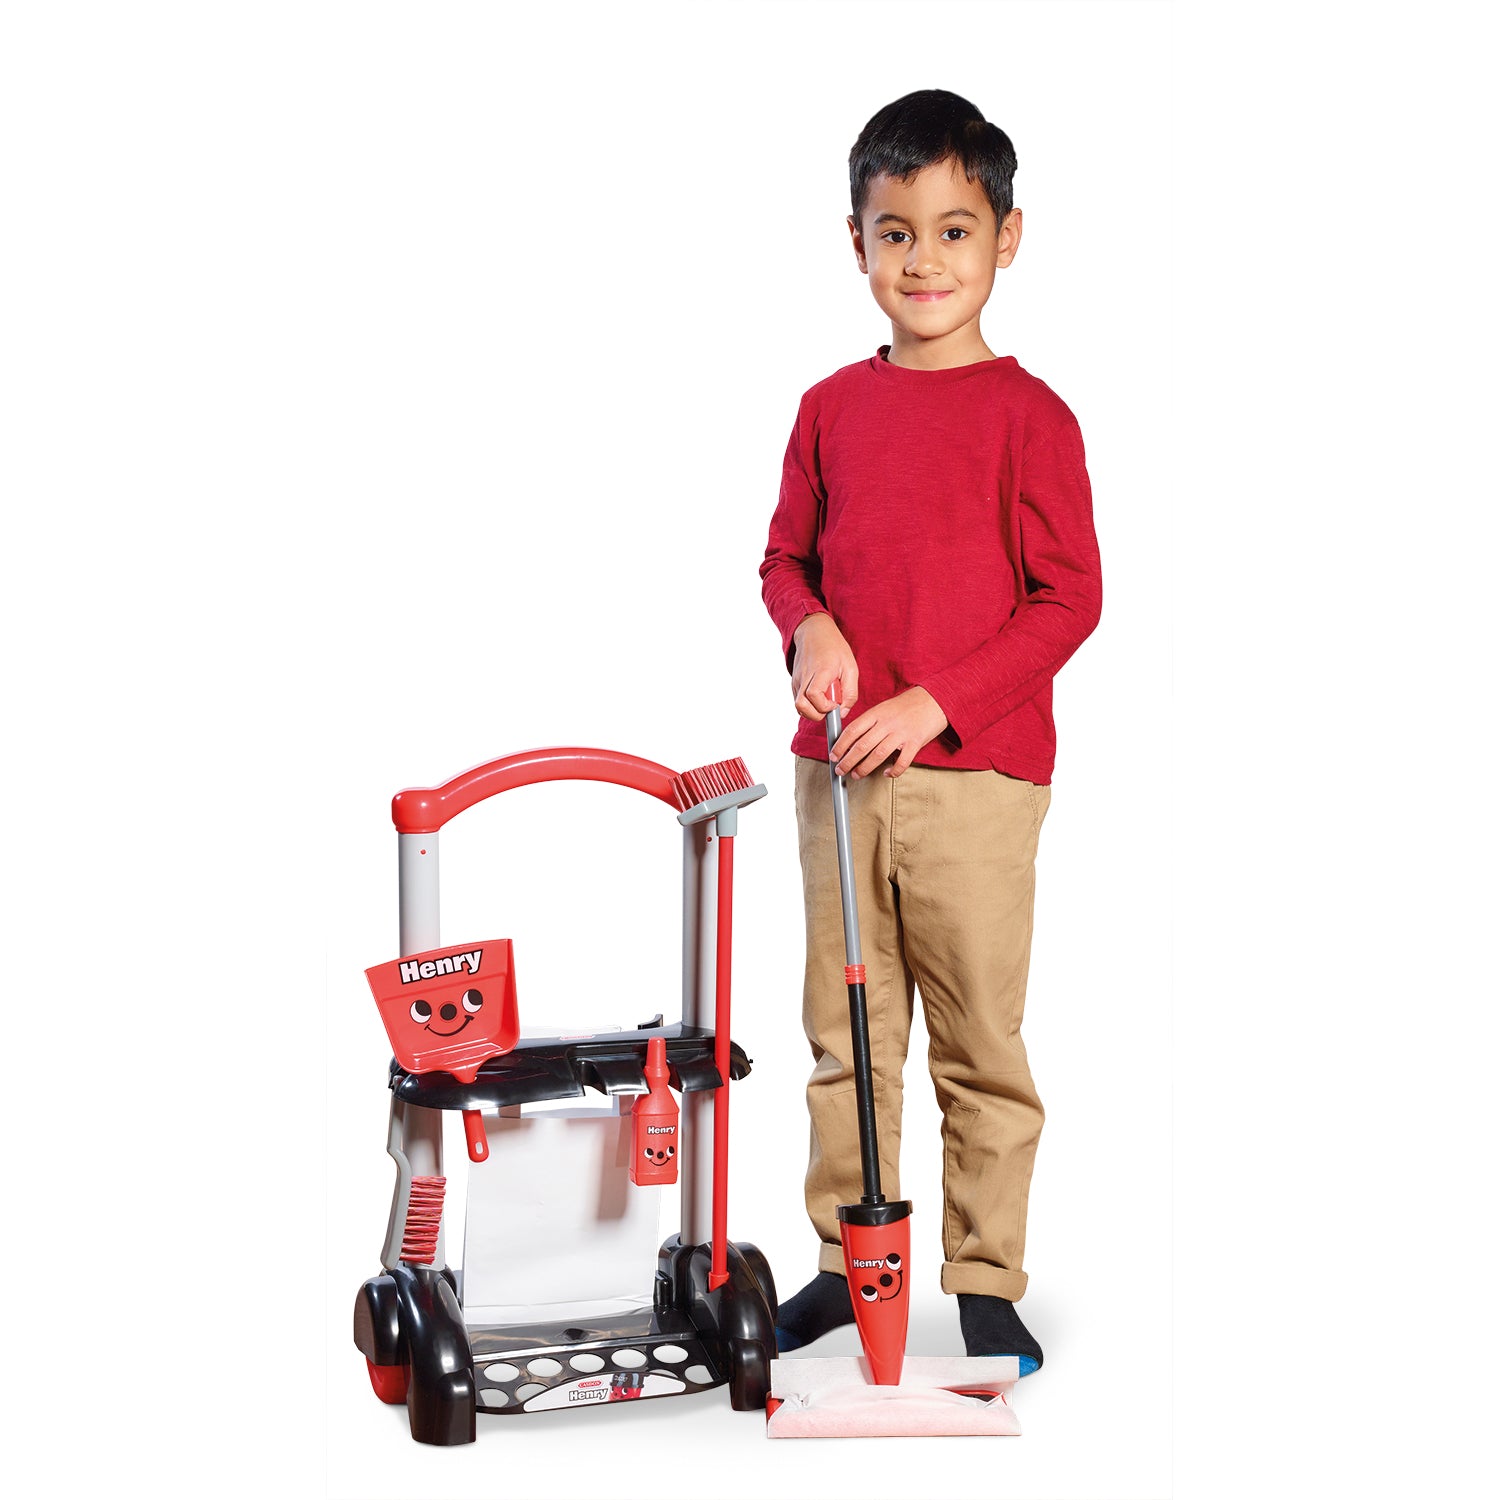 Casdon - Henry Cleaning Trolley Toy